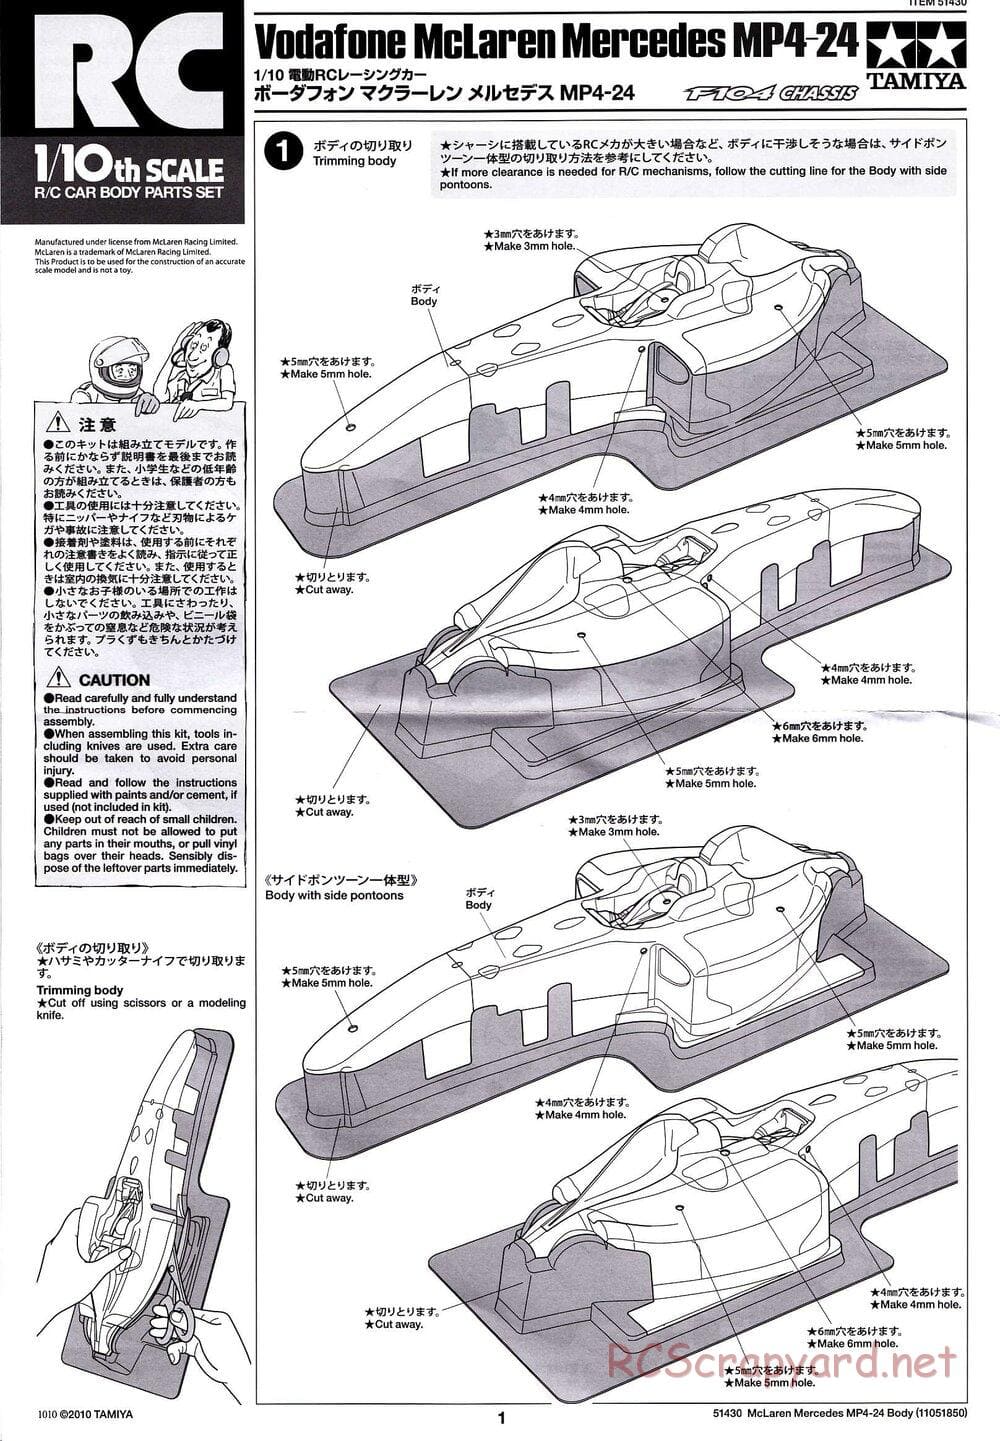 Tamiya - Vodafone McLaren Mercedes MP4-24 - F104 Chassis - Body Manual - Page 1